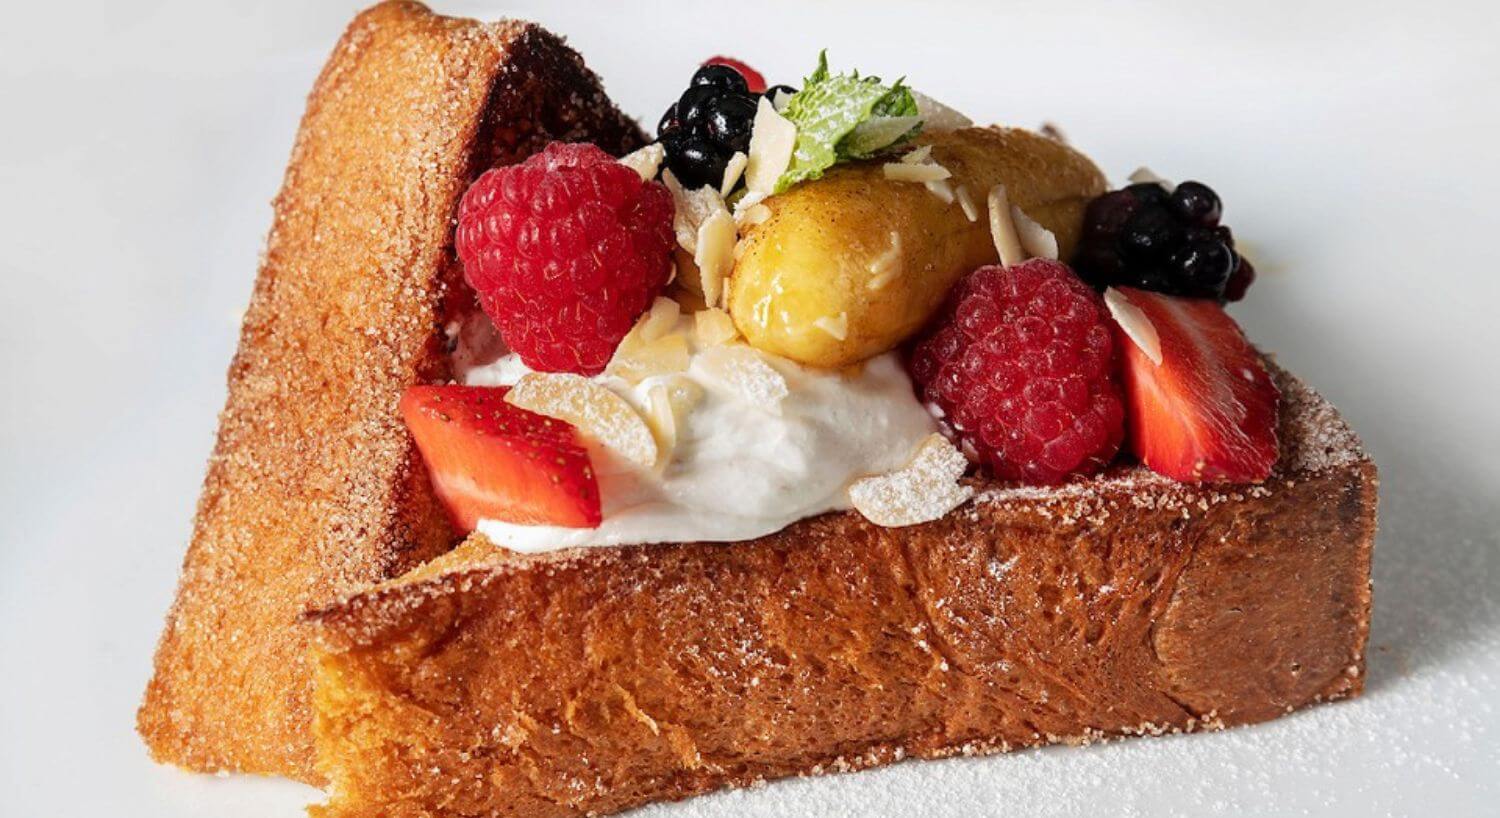 Two triangular pieces of french toast with a dollop of cream, topped with fresh berries, mint sprigs, and powdered sugar.